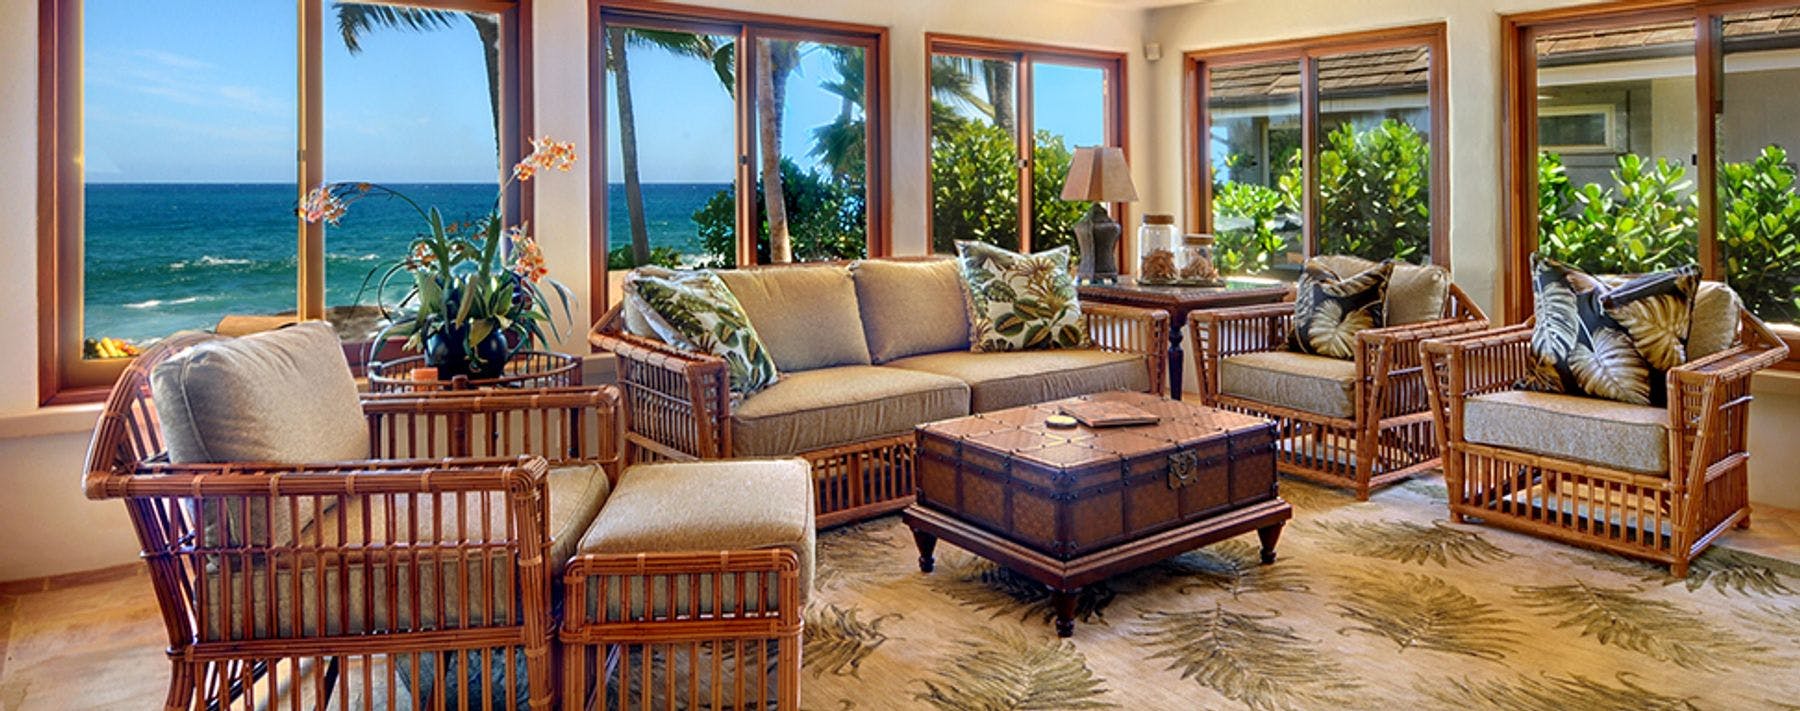 Oceanfront views from living room in Kauai